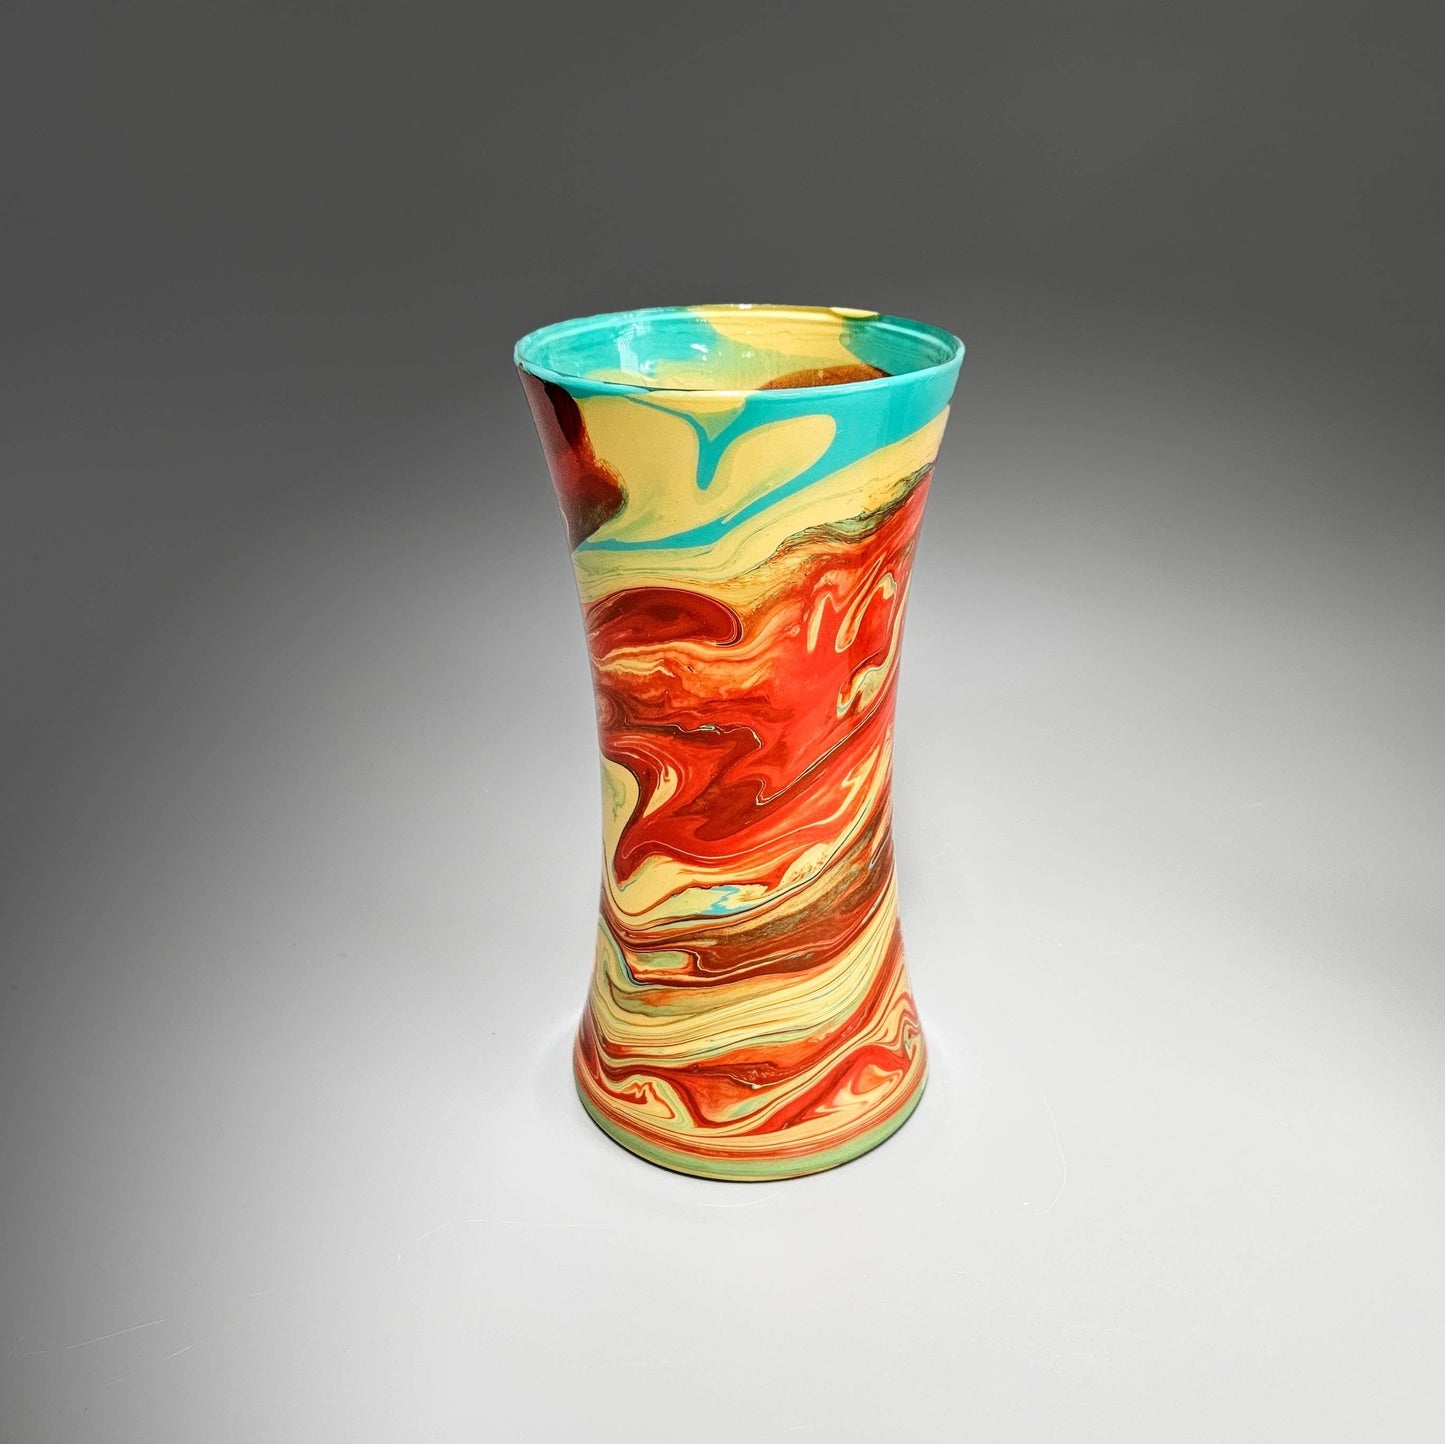 Glass Art Painted Vase in Orange Aqua and Tan | Holiday Gift Ideas